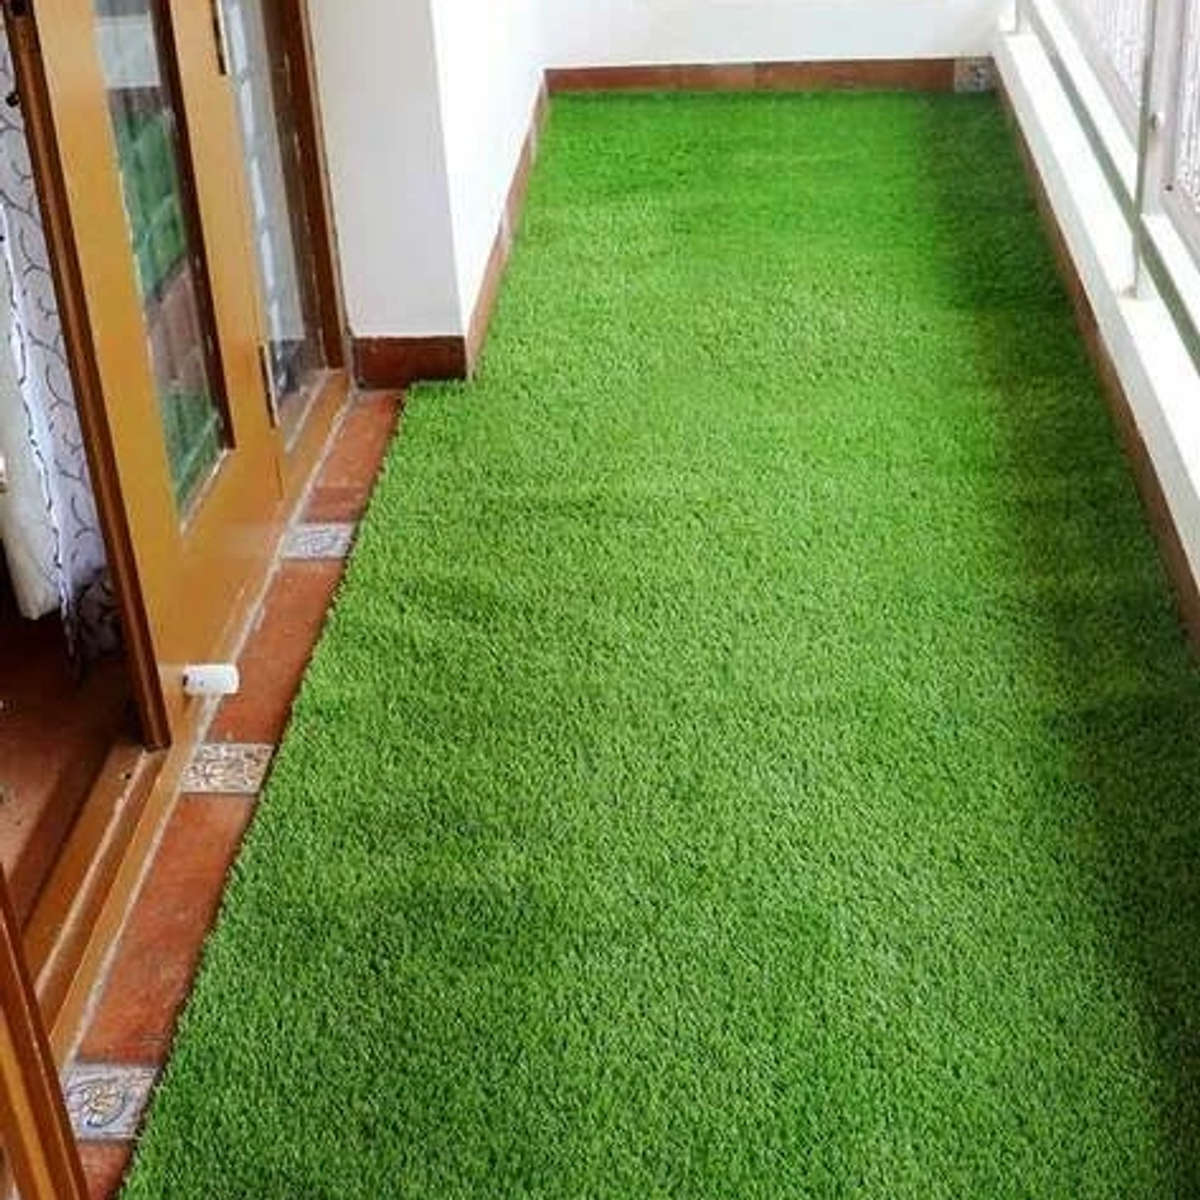 Best artificial grass with best price contact my 8464031482 for more information.
25MM=Rs.30 per sqft.